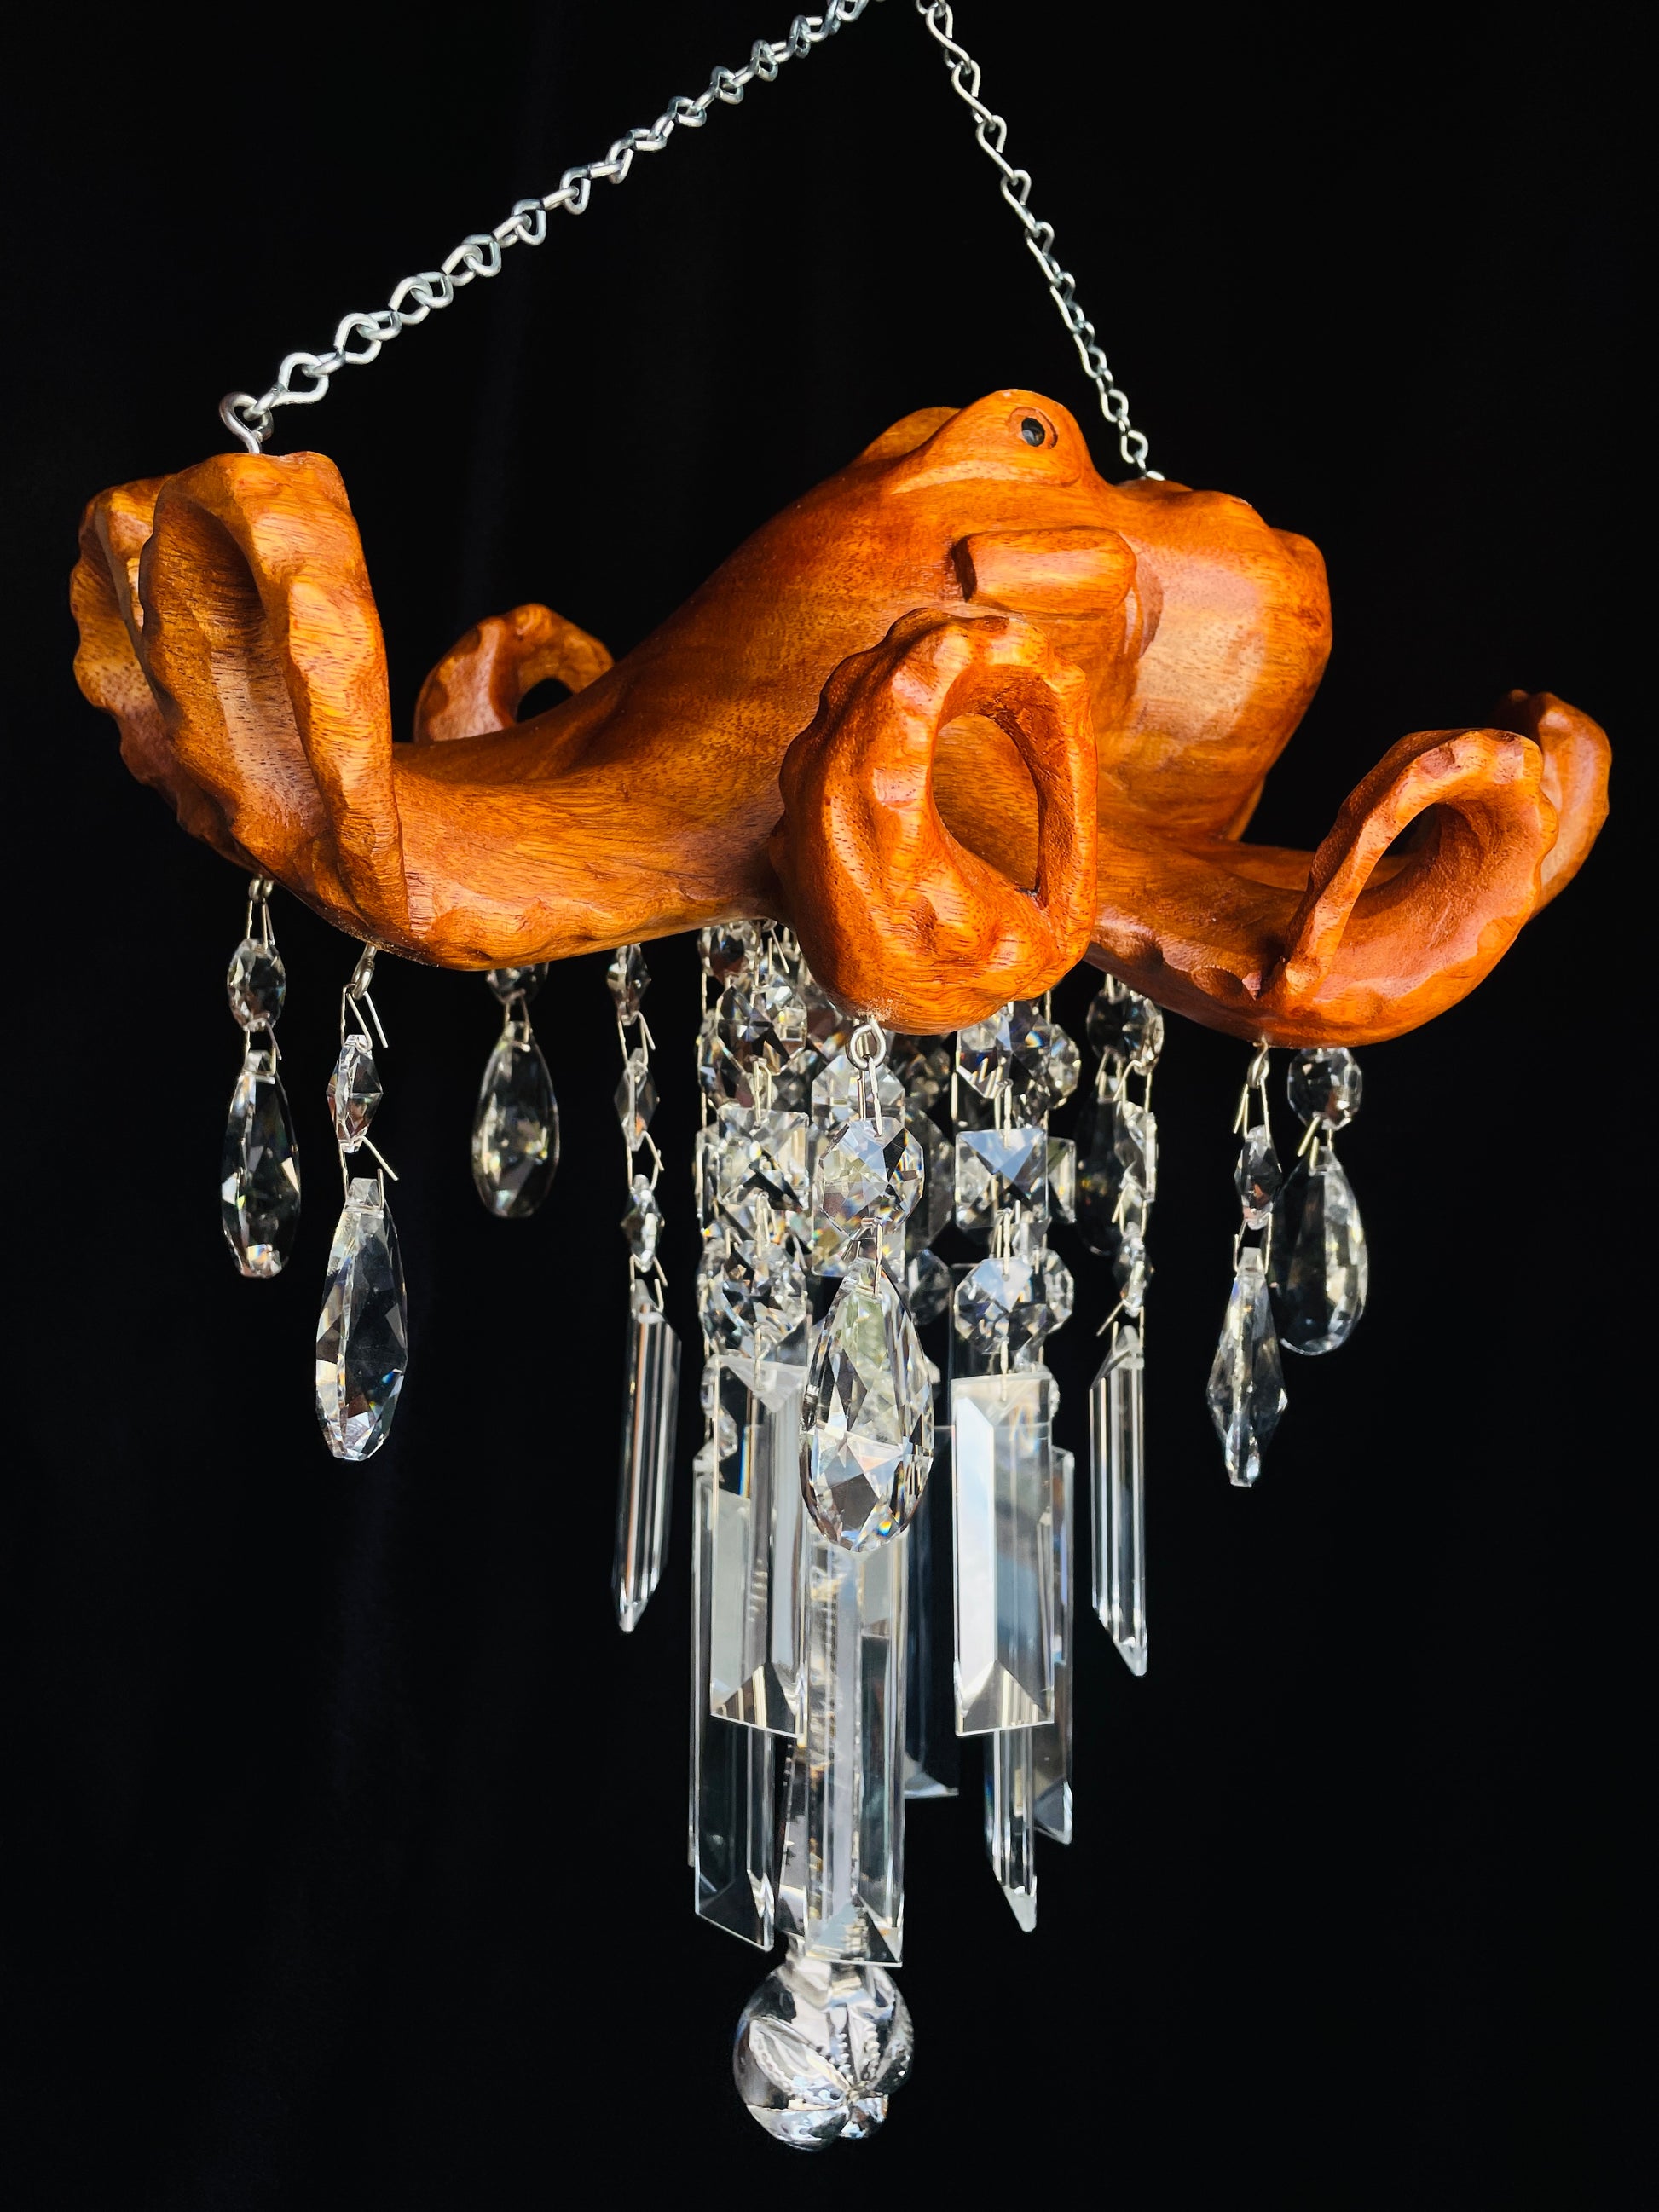 handcarved octopus windchime sun catcher by Dazzling driftwood